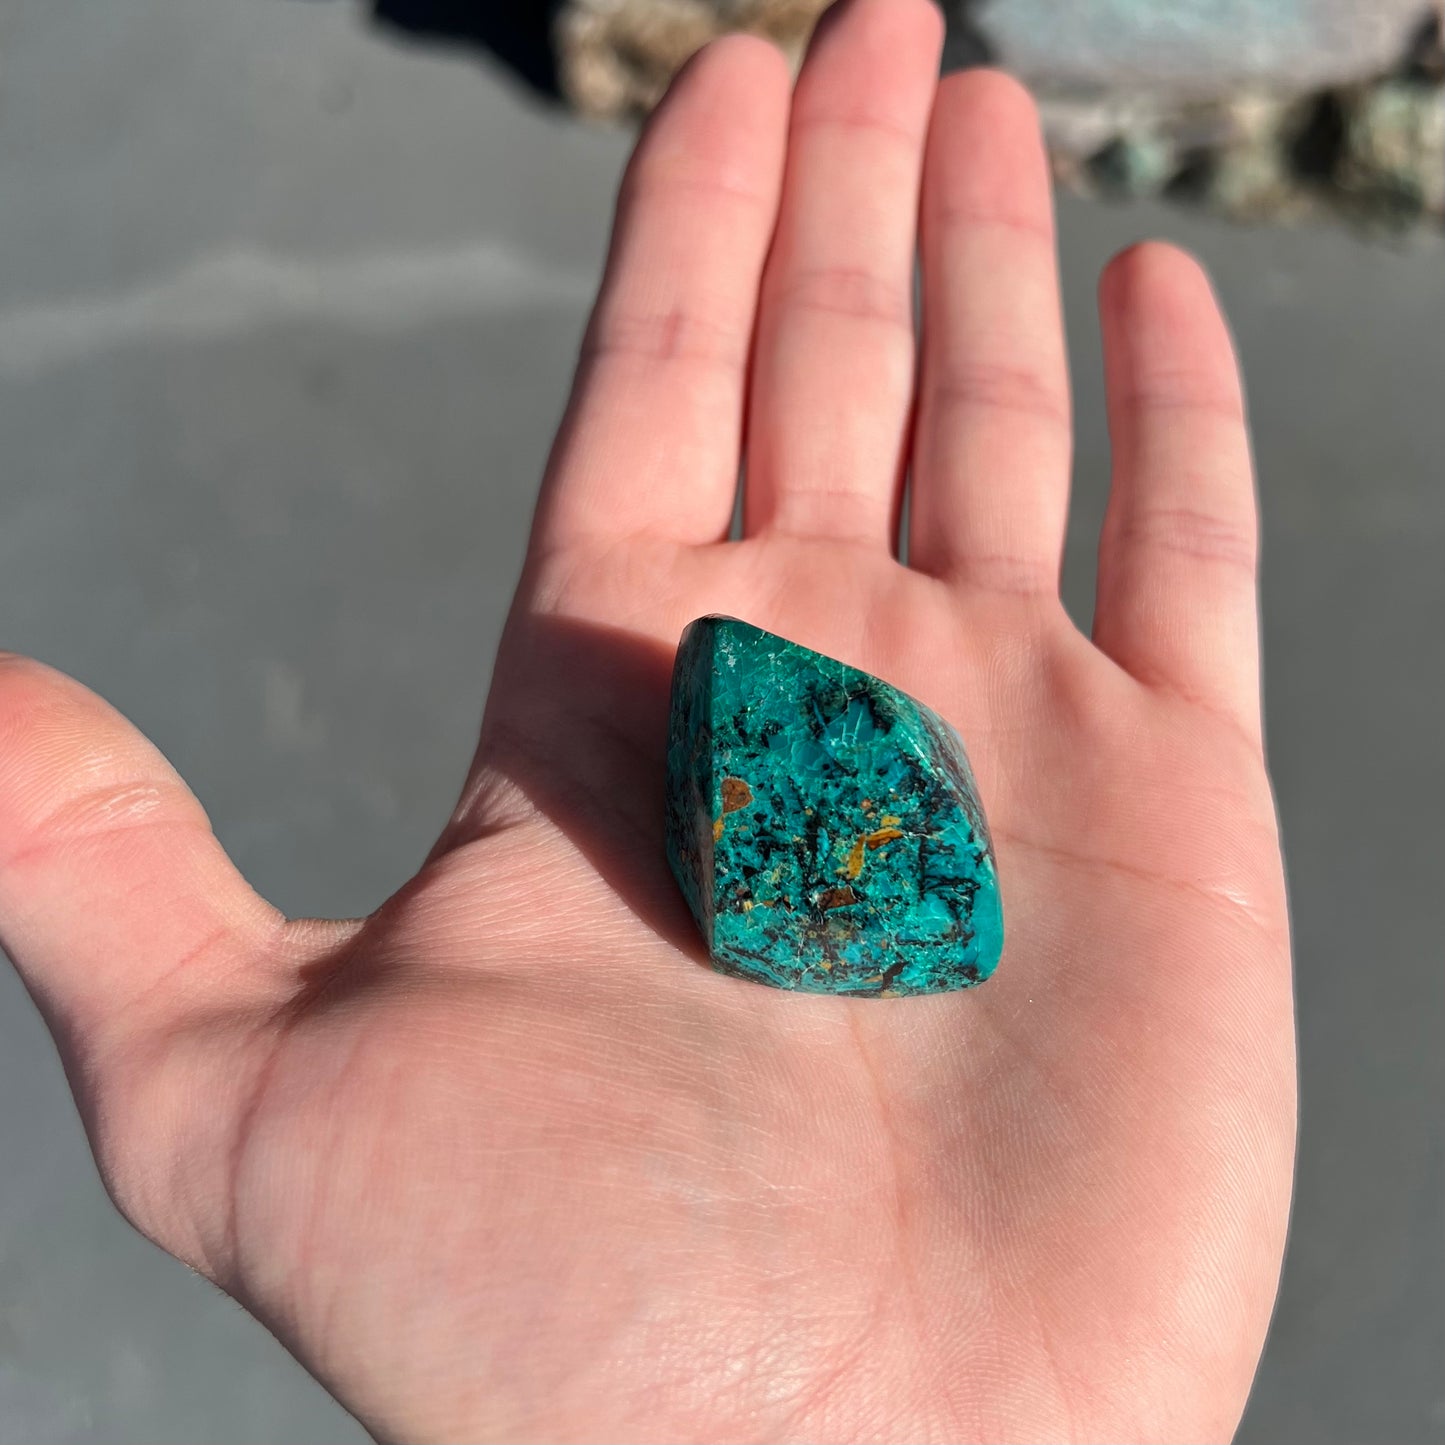 A loose polished chrysocolla specimen that has a crackled effect.